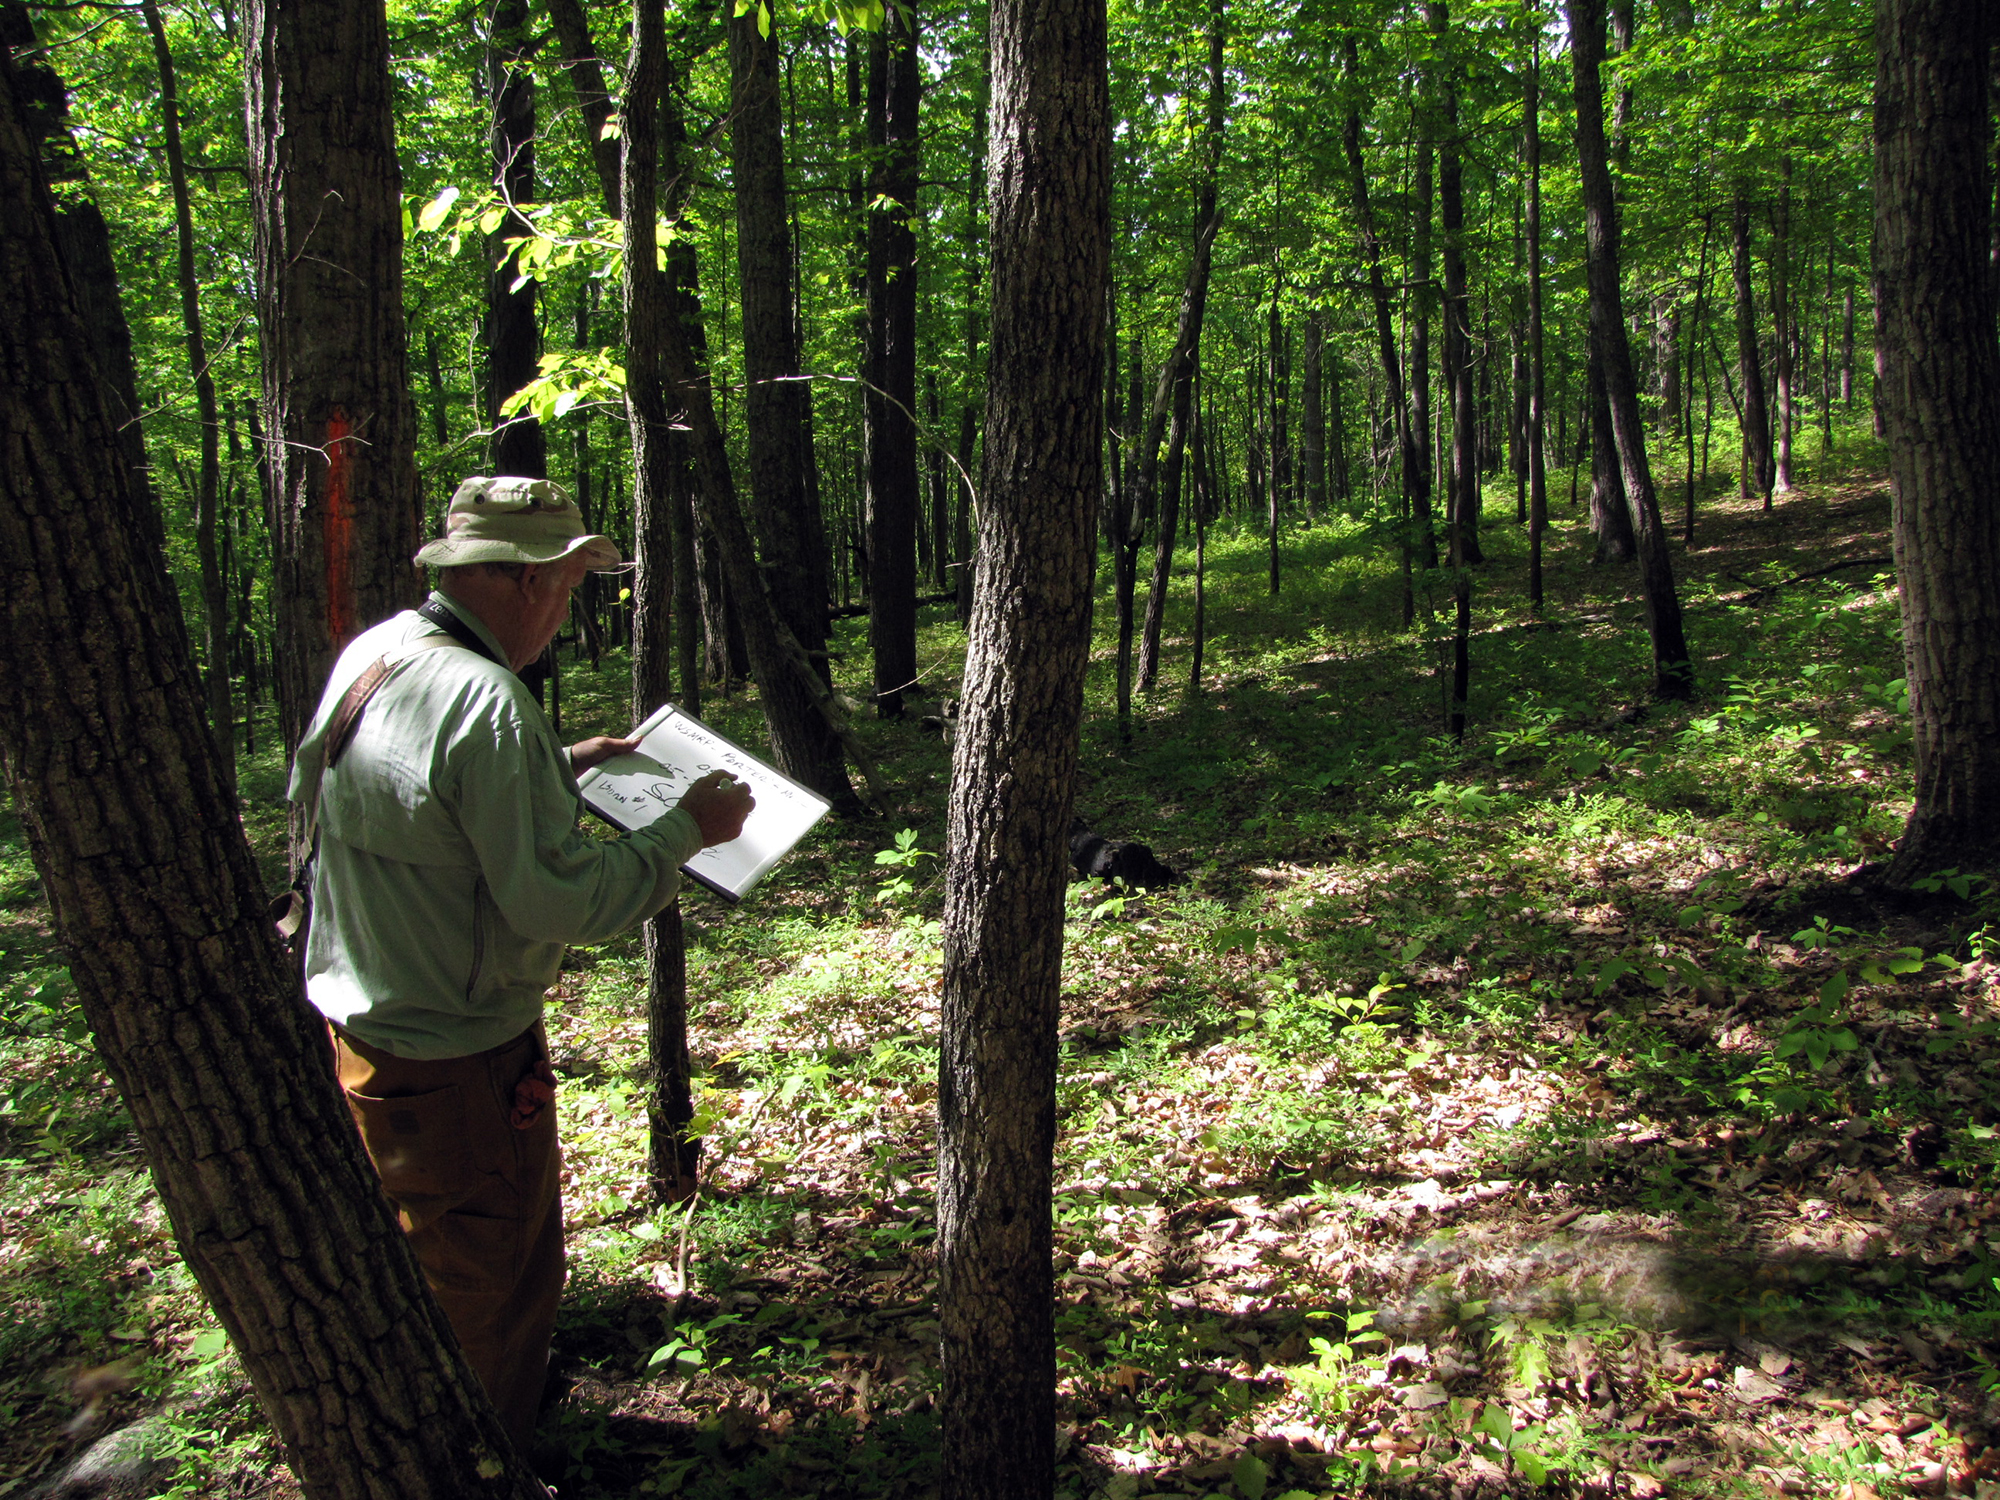 A man stands in a forest holding a clipboard and recording notes about the bird species observed in the area. Light dapples the forest floor as it filters through the thick trees.